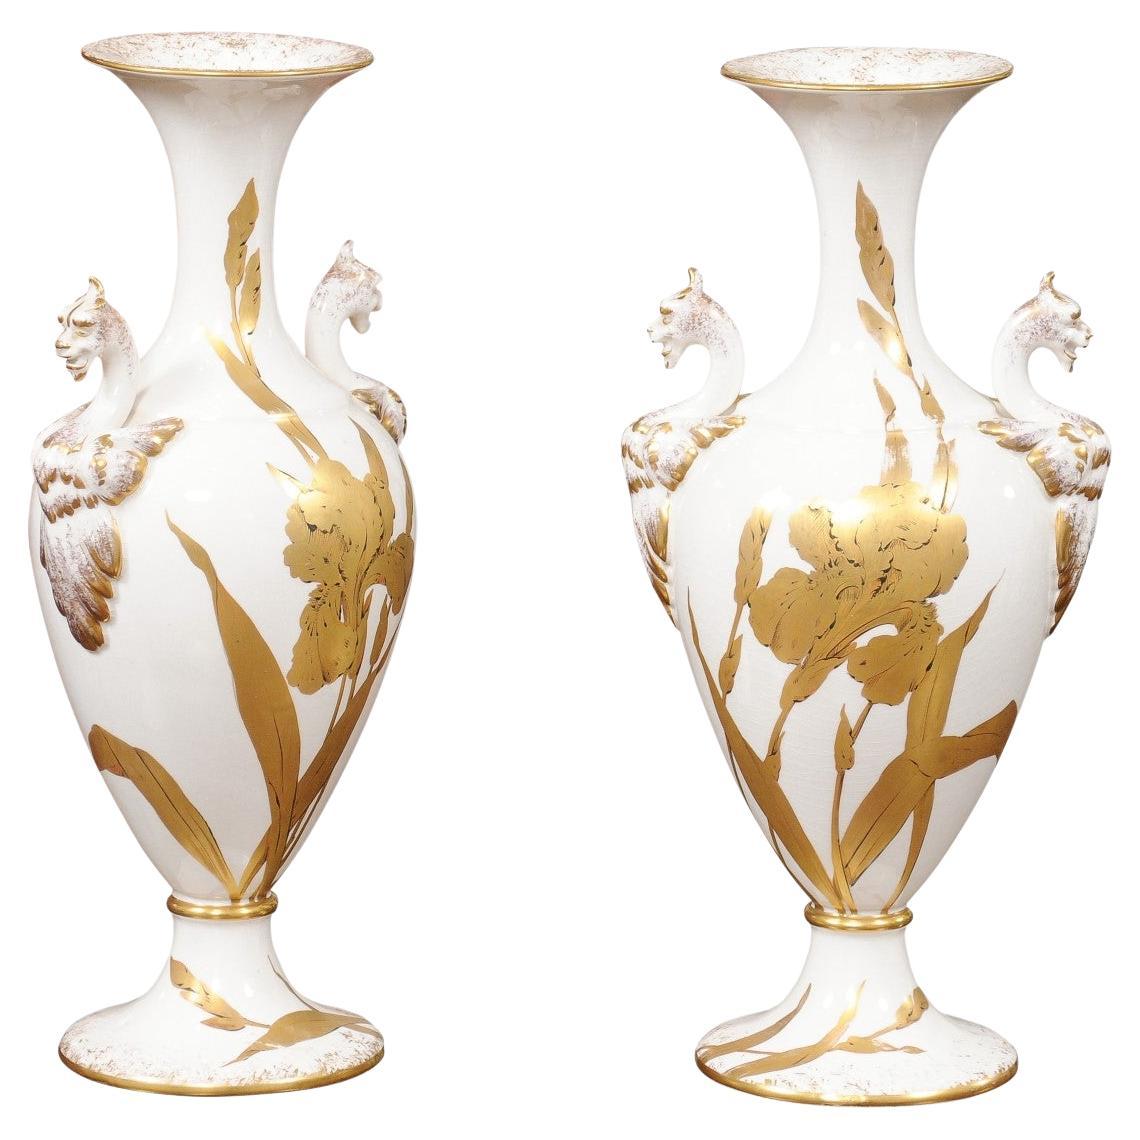 Pair of Porcelain Vases with Gilt Painted Irises, 20th Century Italy